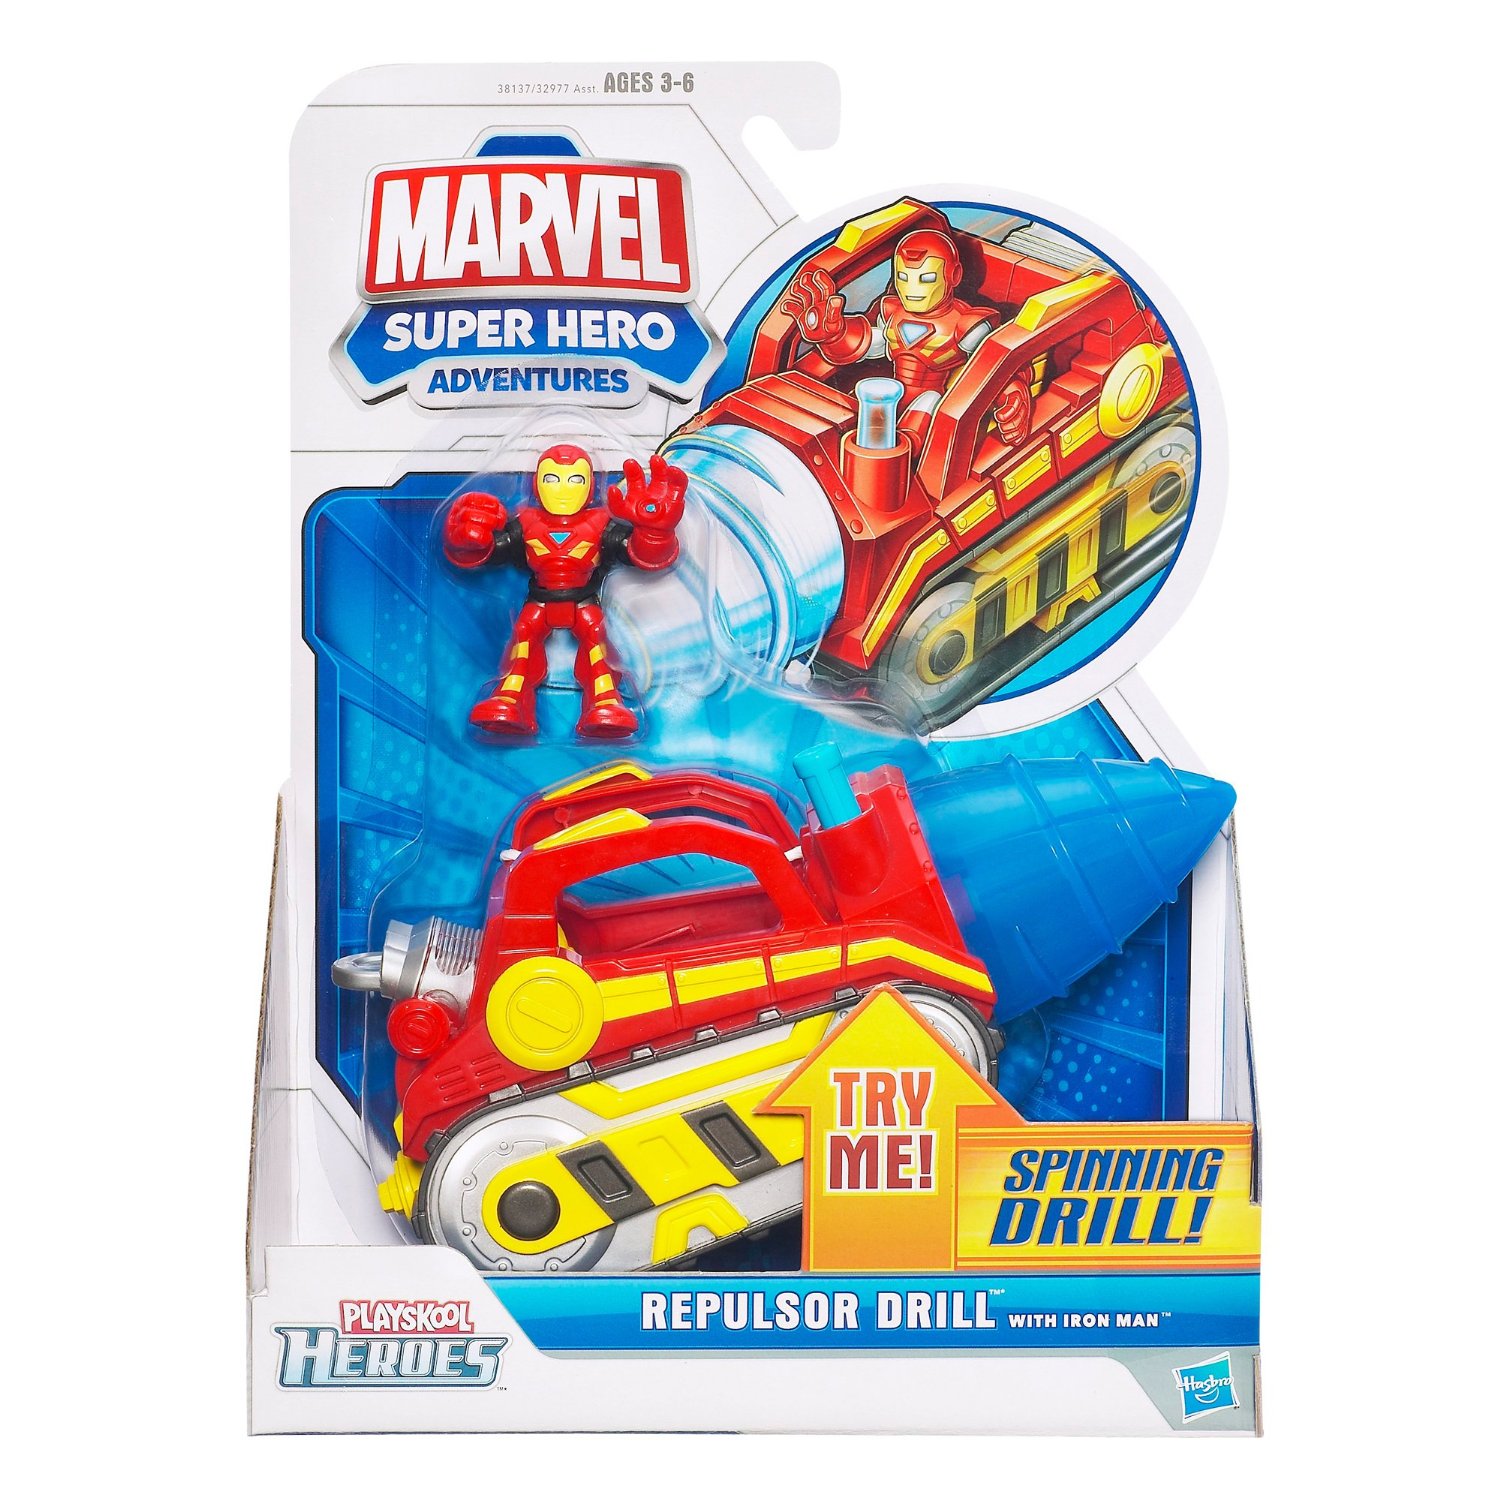 Marvel Super Hero Repulsor Drill with Iron Man Only $4.17 Shipped (Reg. $14.99)